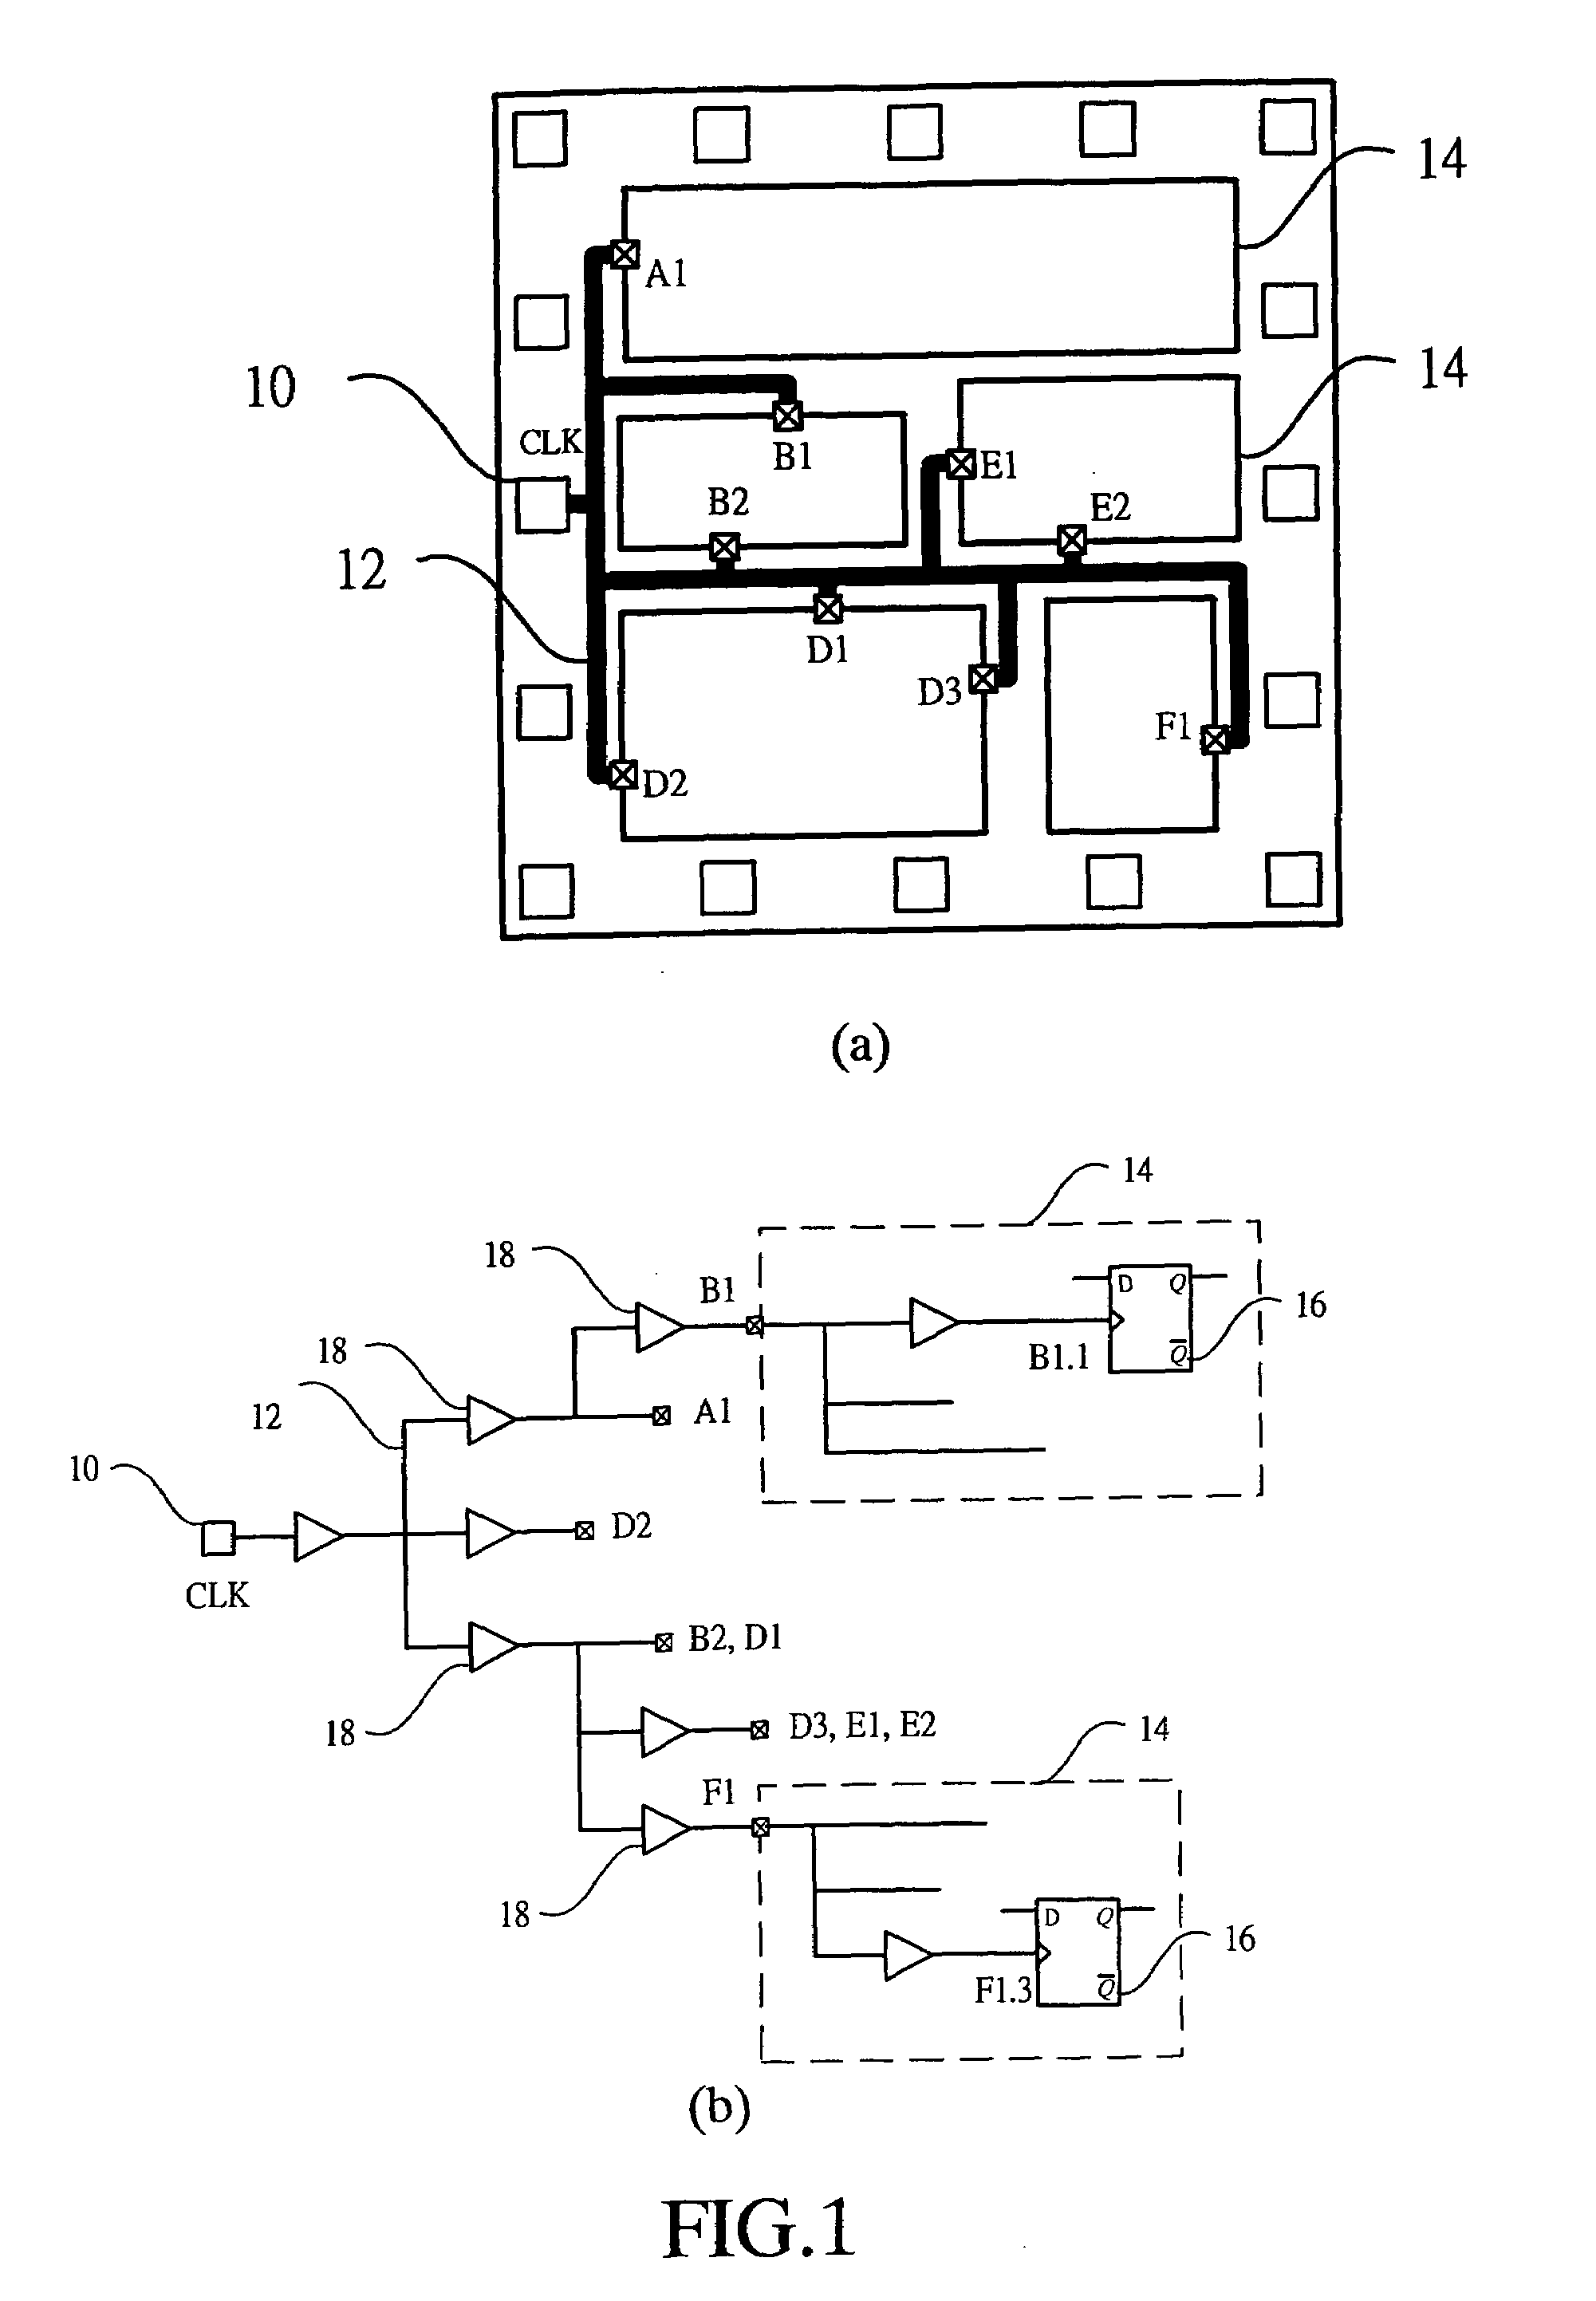 Method and apparatus for rapidly selecting types of buffers which are inserted into the clock tree for high-speed very-large-scale-integration